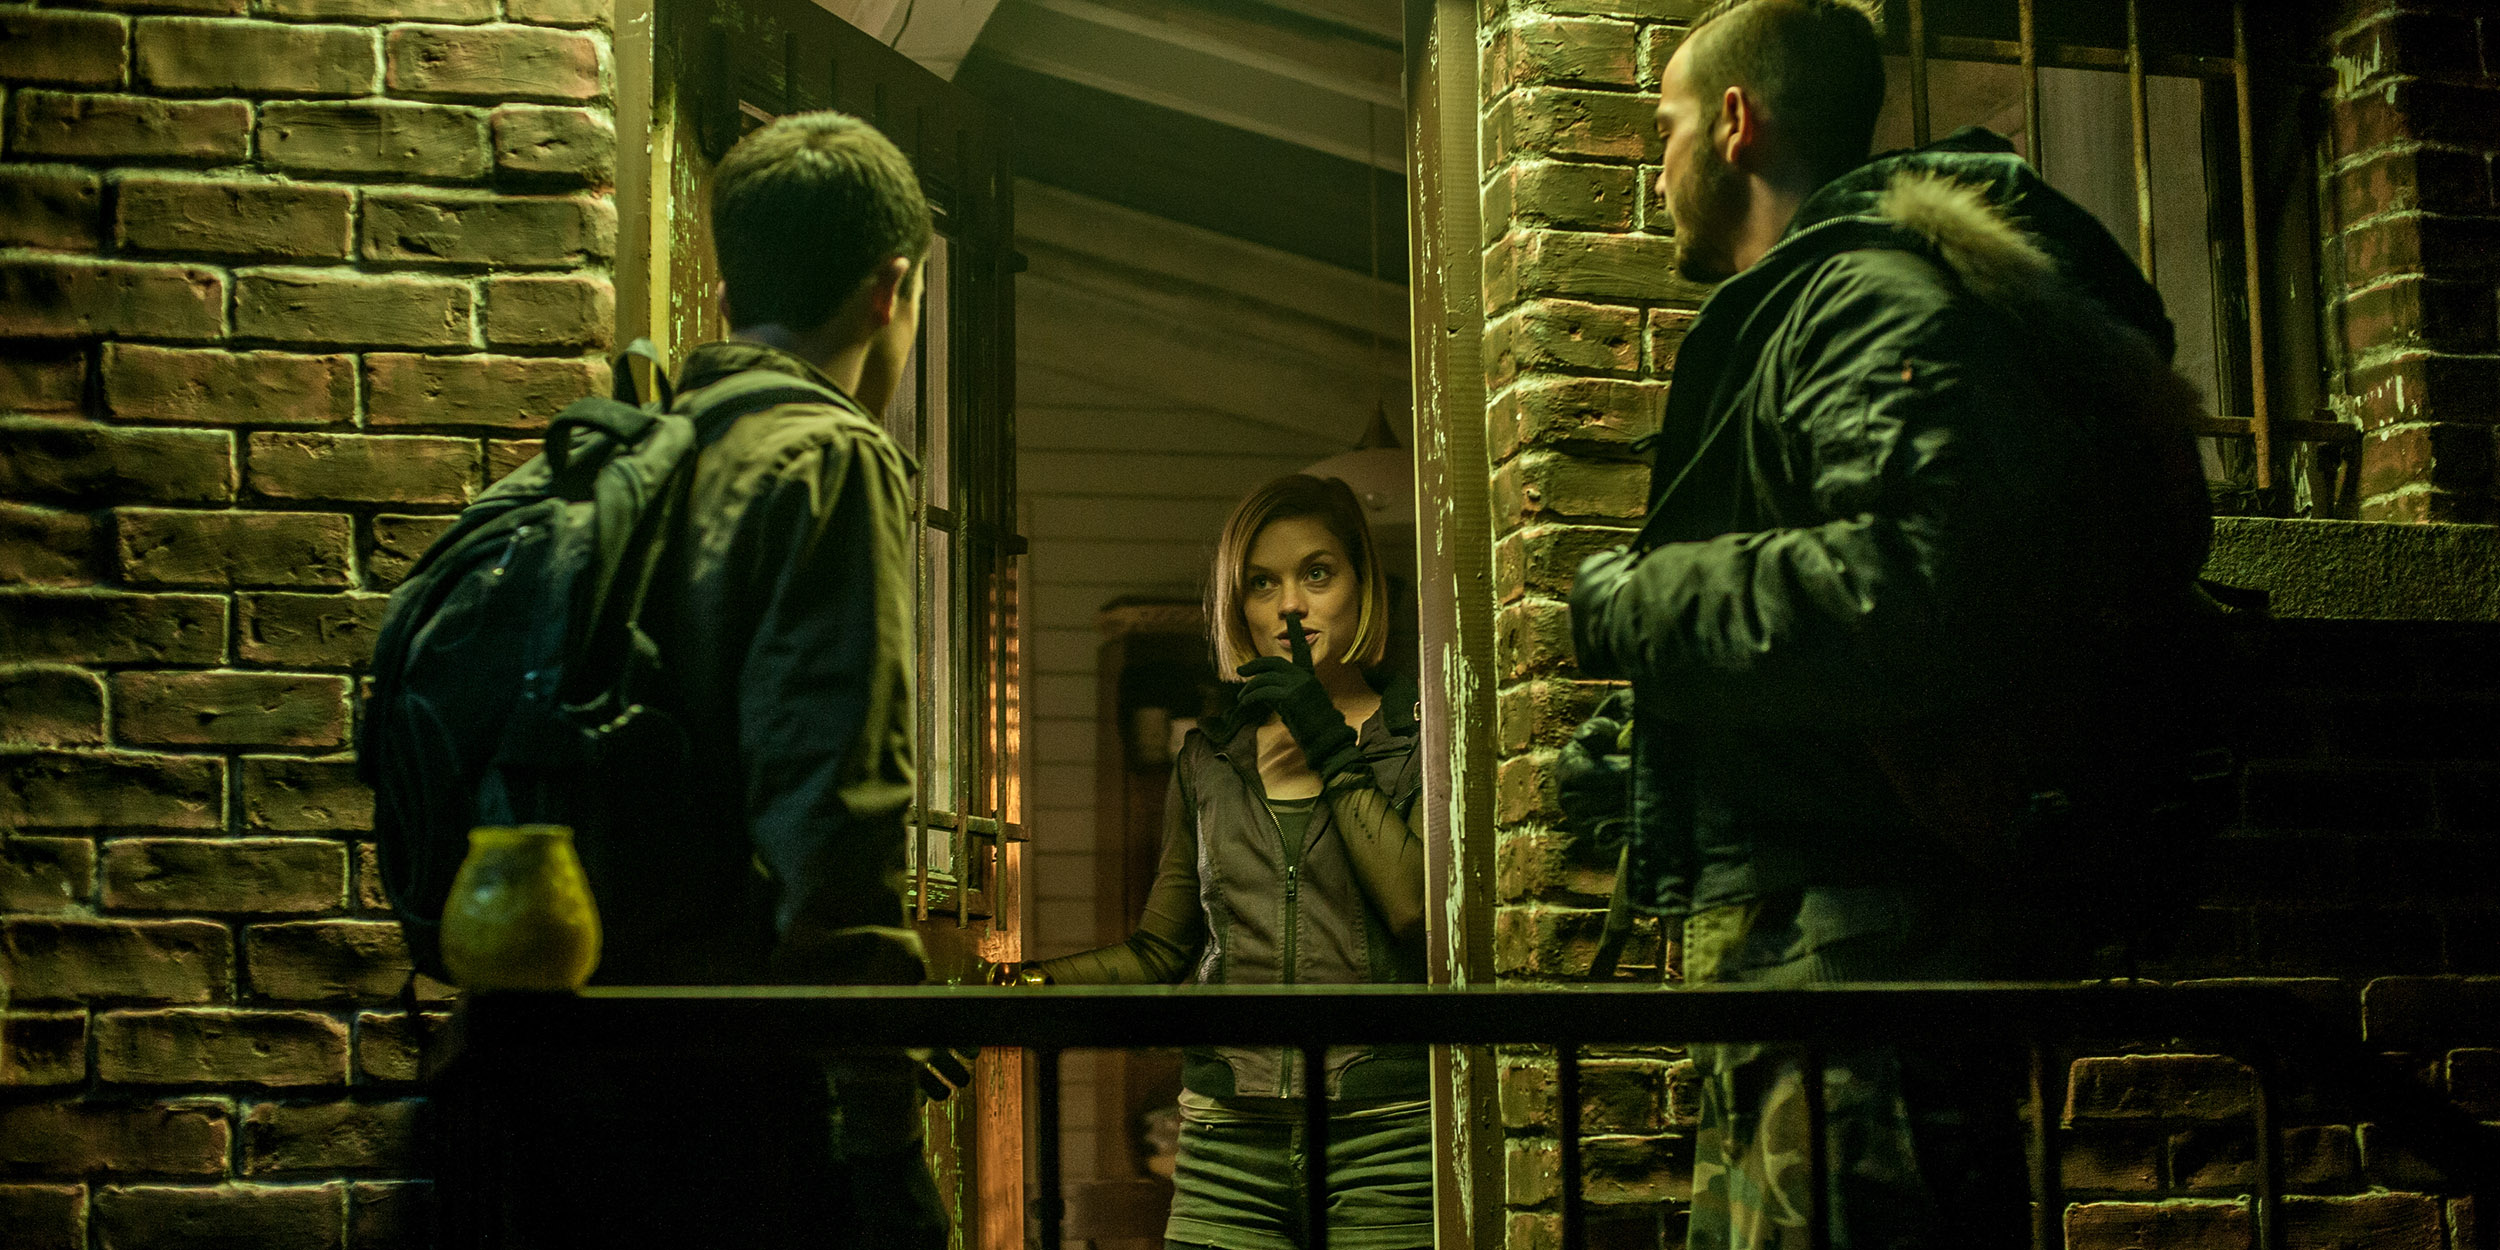 Dylan Minnette, Jane Levy and Daniel Zovatto star in Screen Gems' horror-thriller DON'T BREATHE.